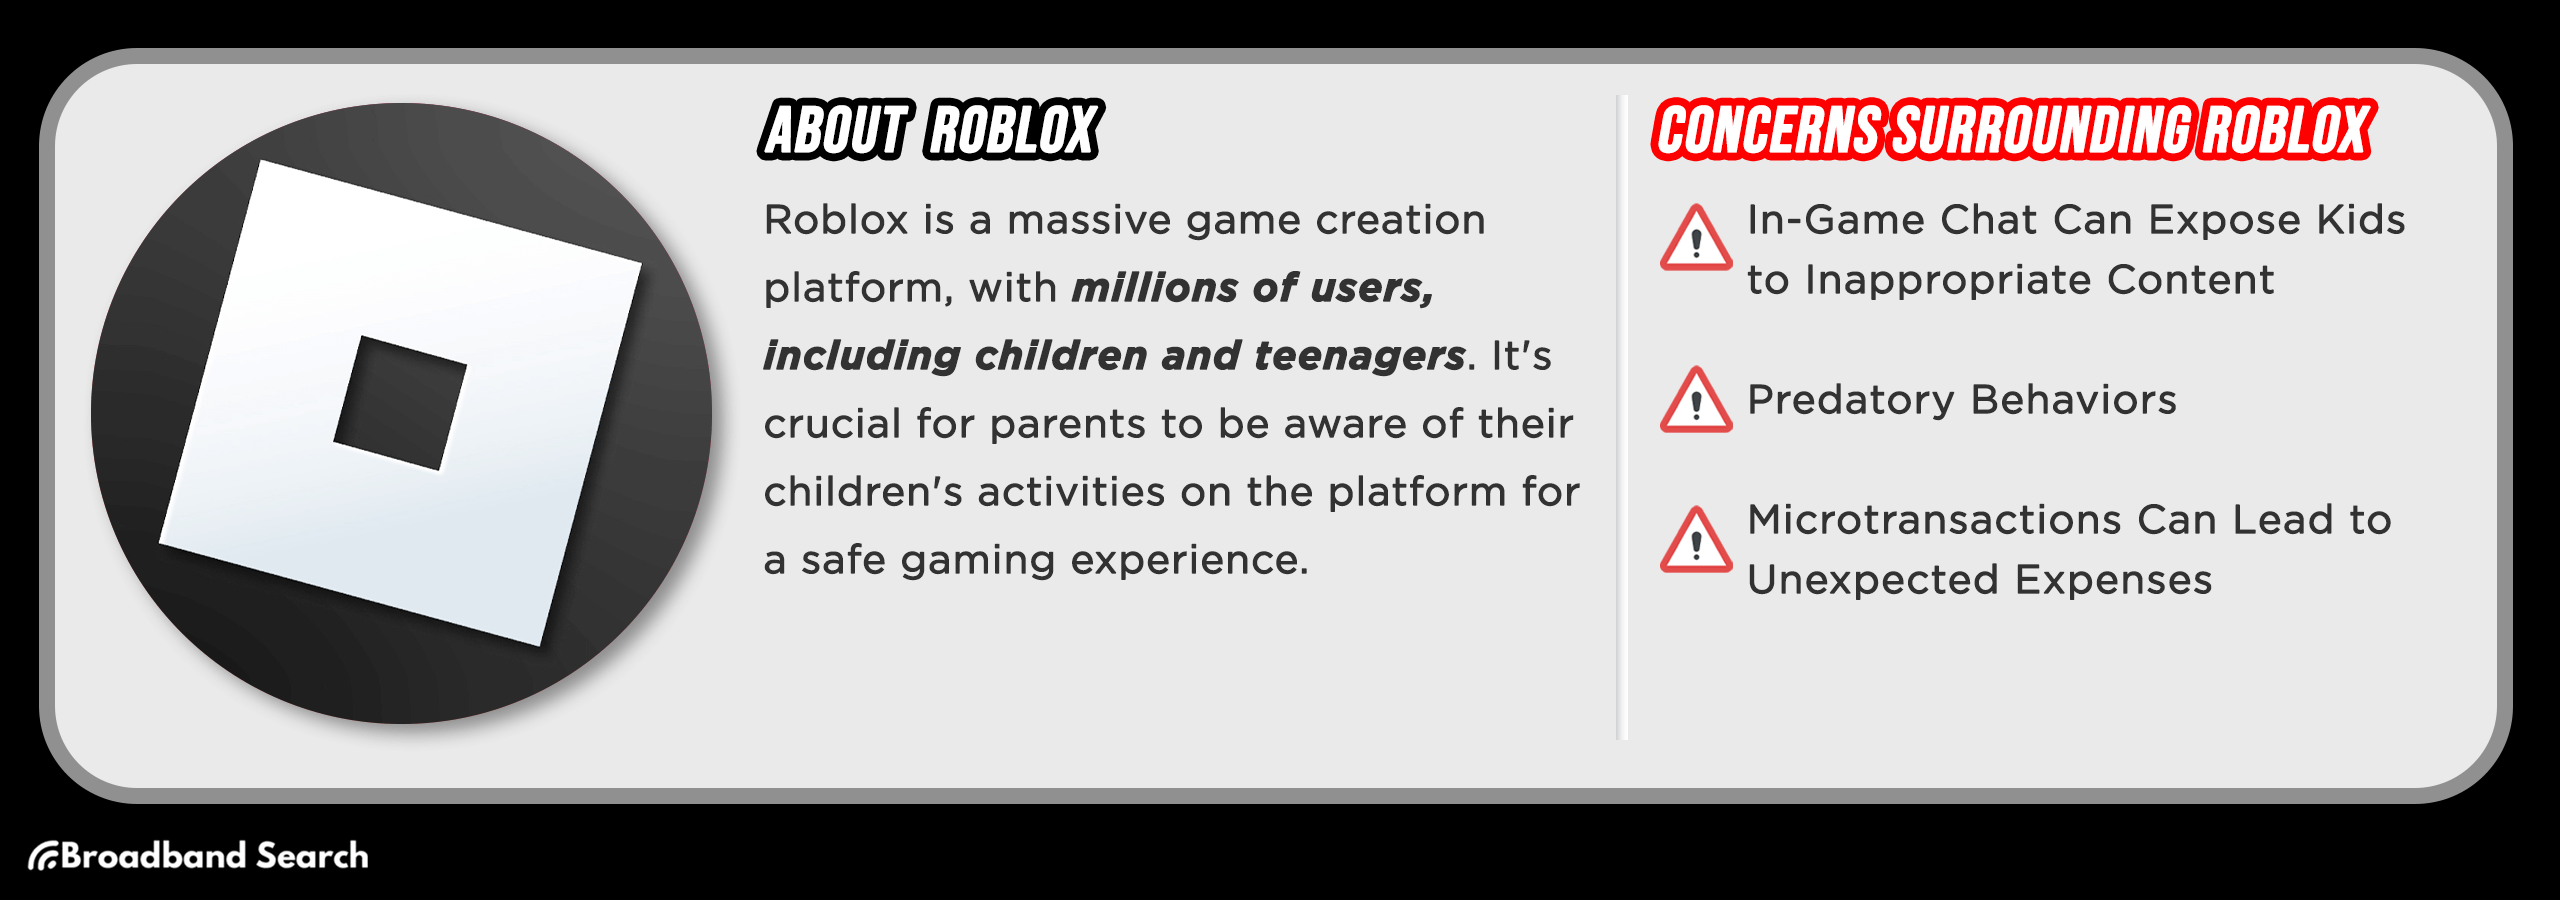 Statistics on Roblox and concerns surrounding usage of the social media app